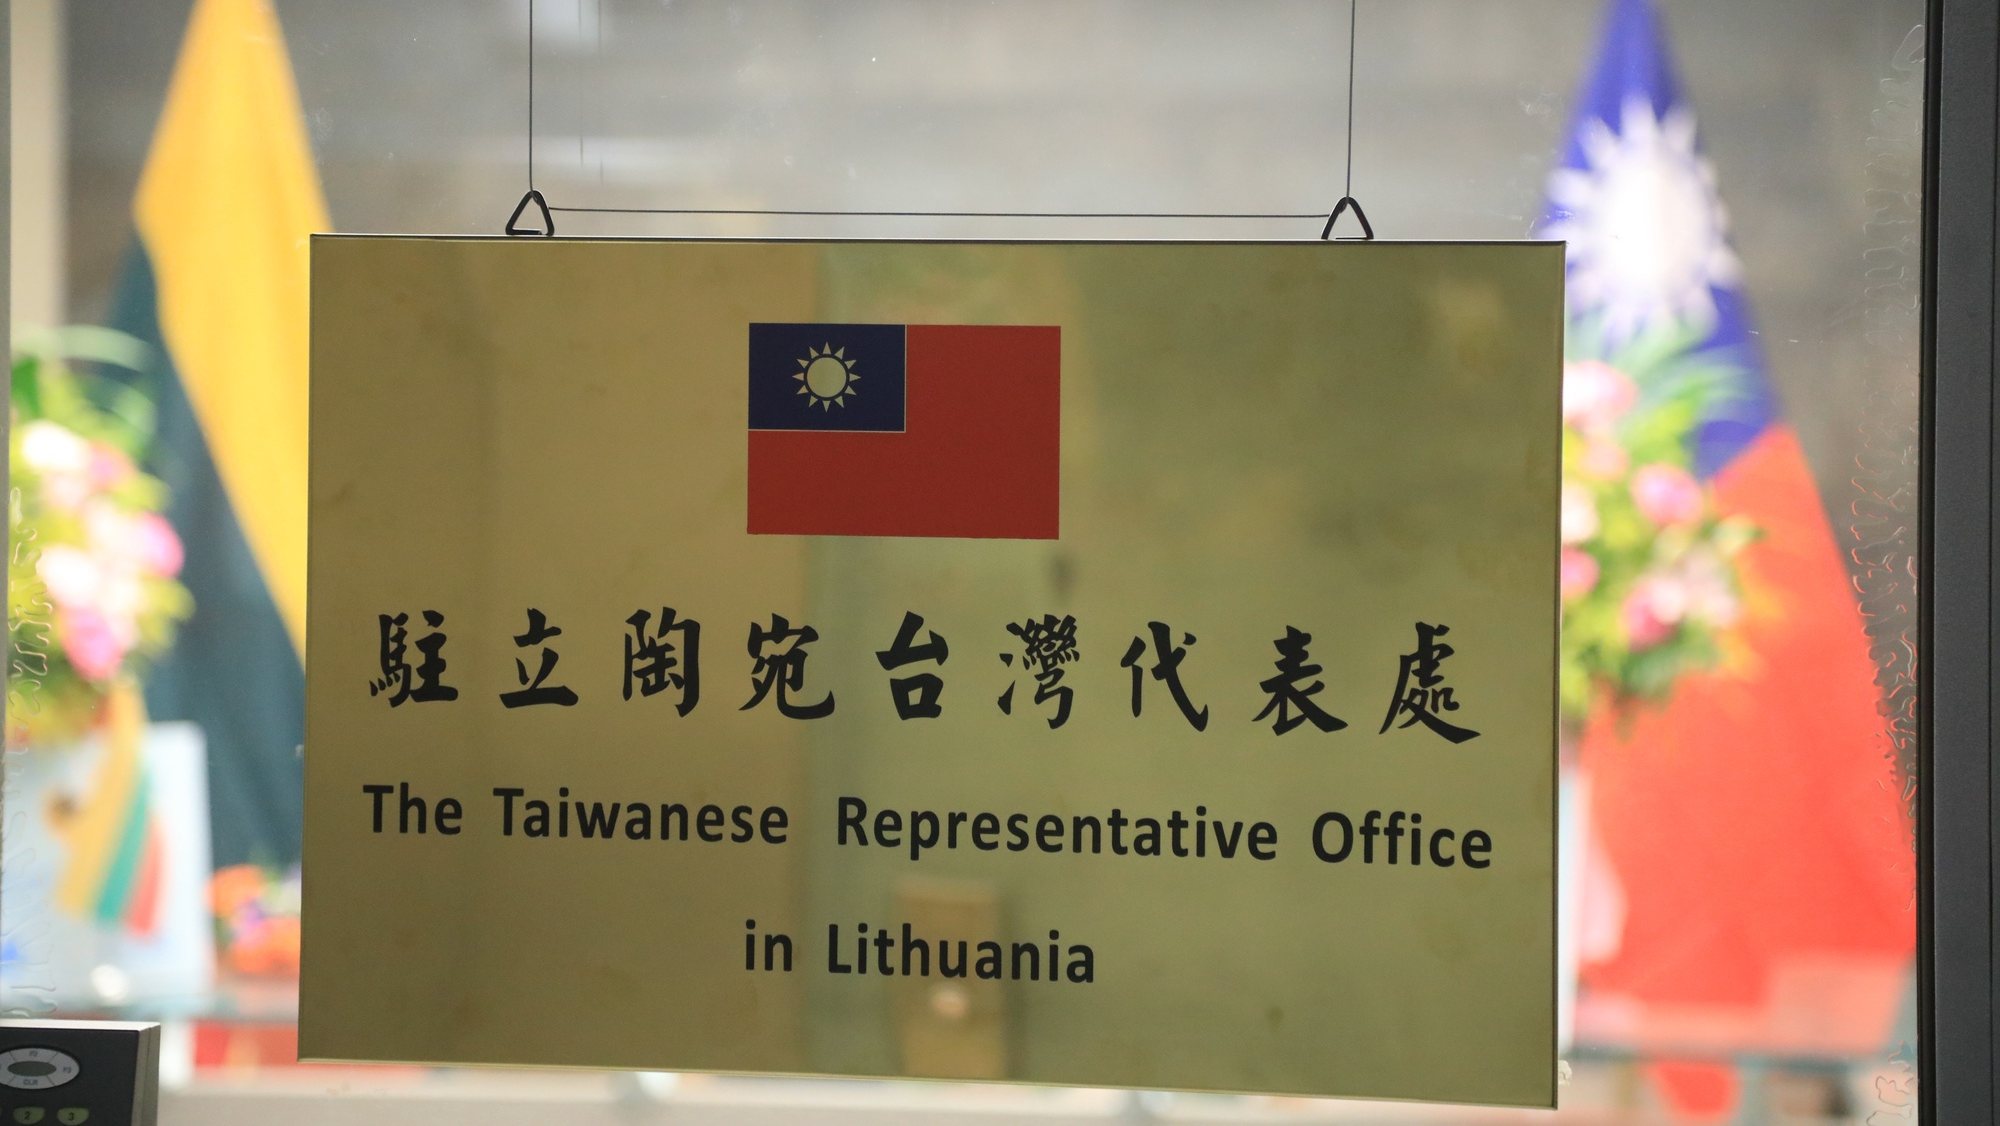 epa09589911 A plaque at the Taiwanese Representative Office on the 16th floor at the Jasinskio gatve 16B in Vilnius, Lithuania, 18 November 2021. Taipei announced on 18 November it has formally opened a de facto embassy in Lithuania using the name Taiwan.  EPA/STRINGER